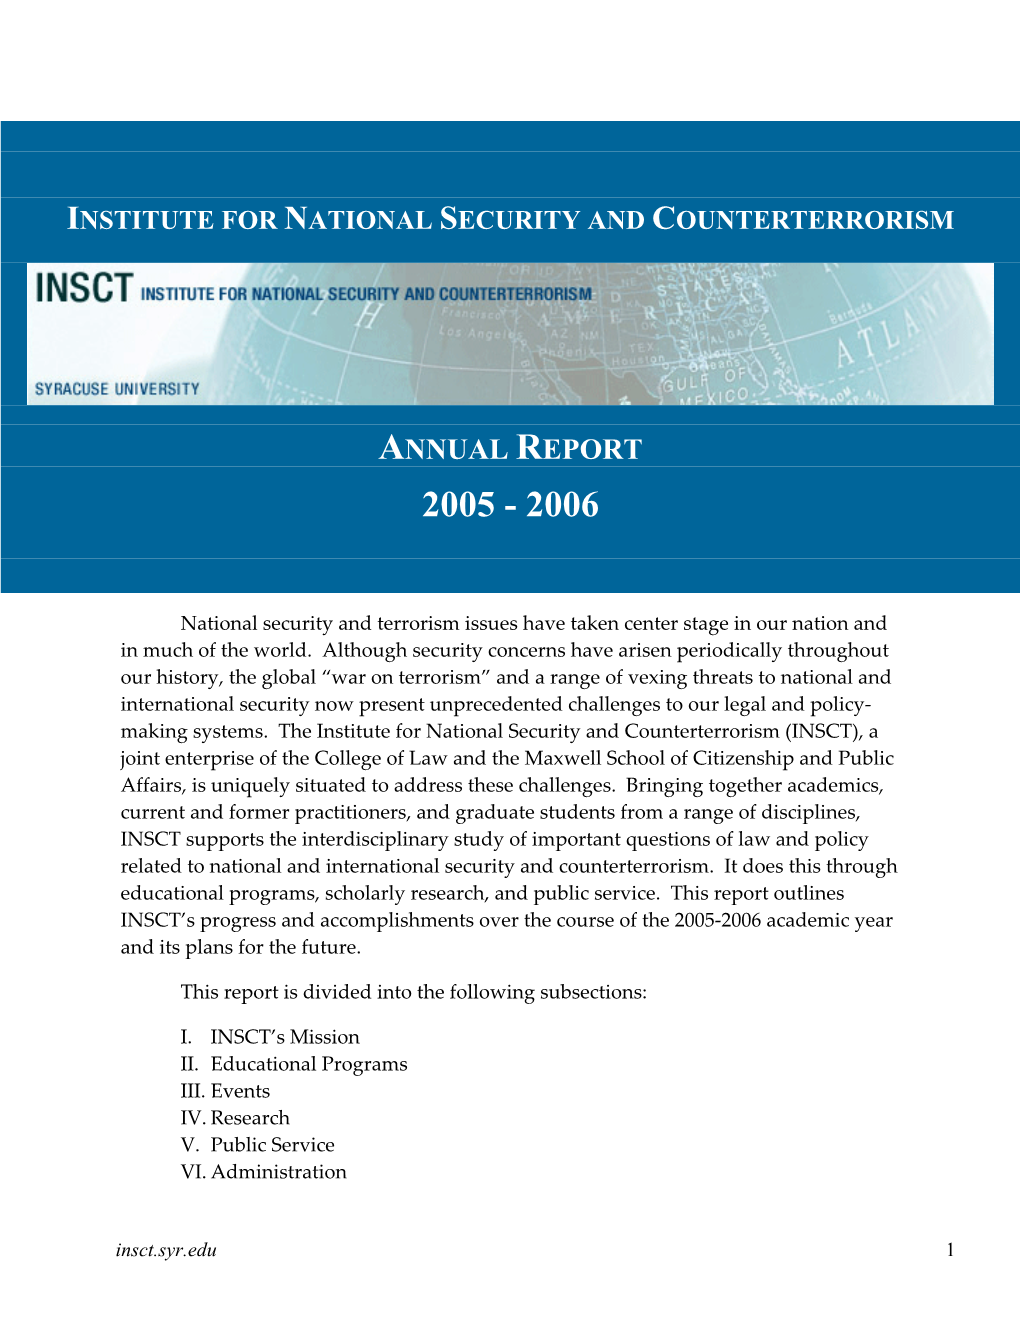 Institute for National Security and Counterterrorism Annual Report